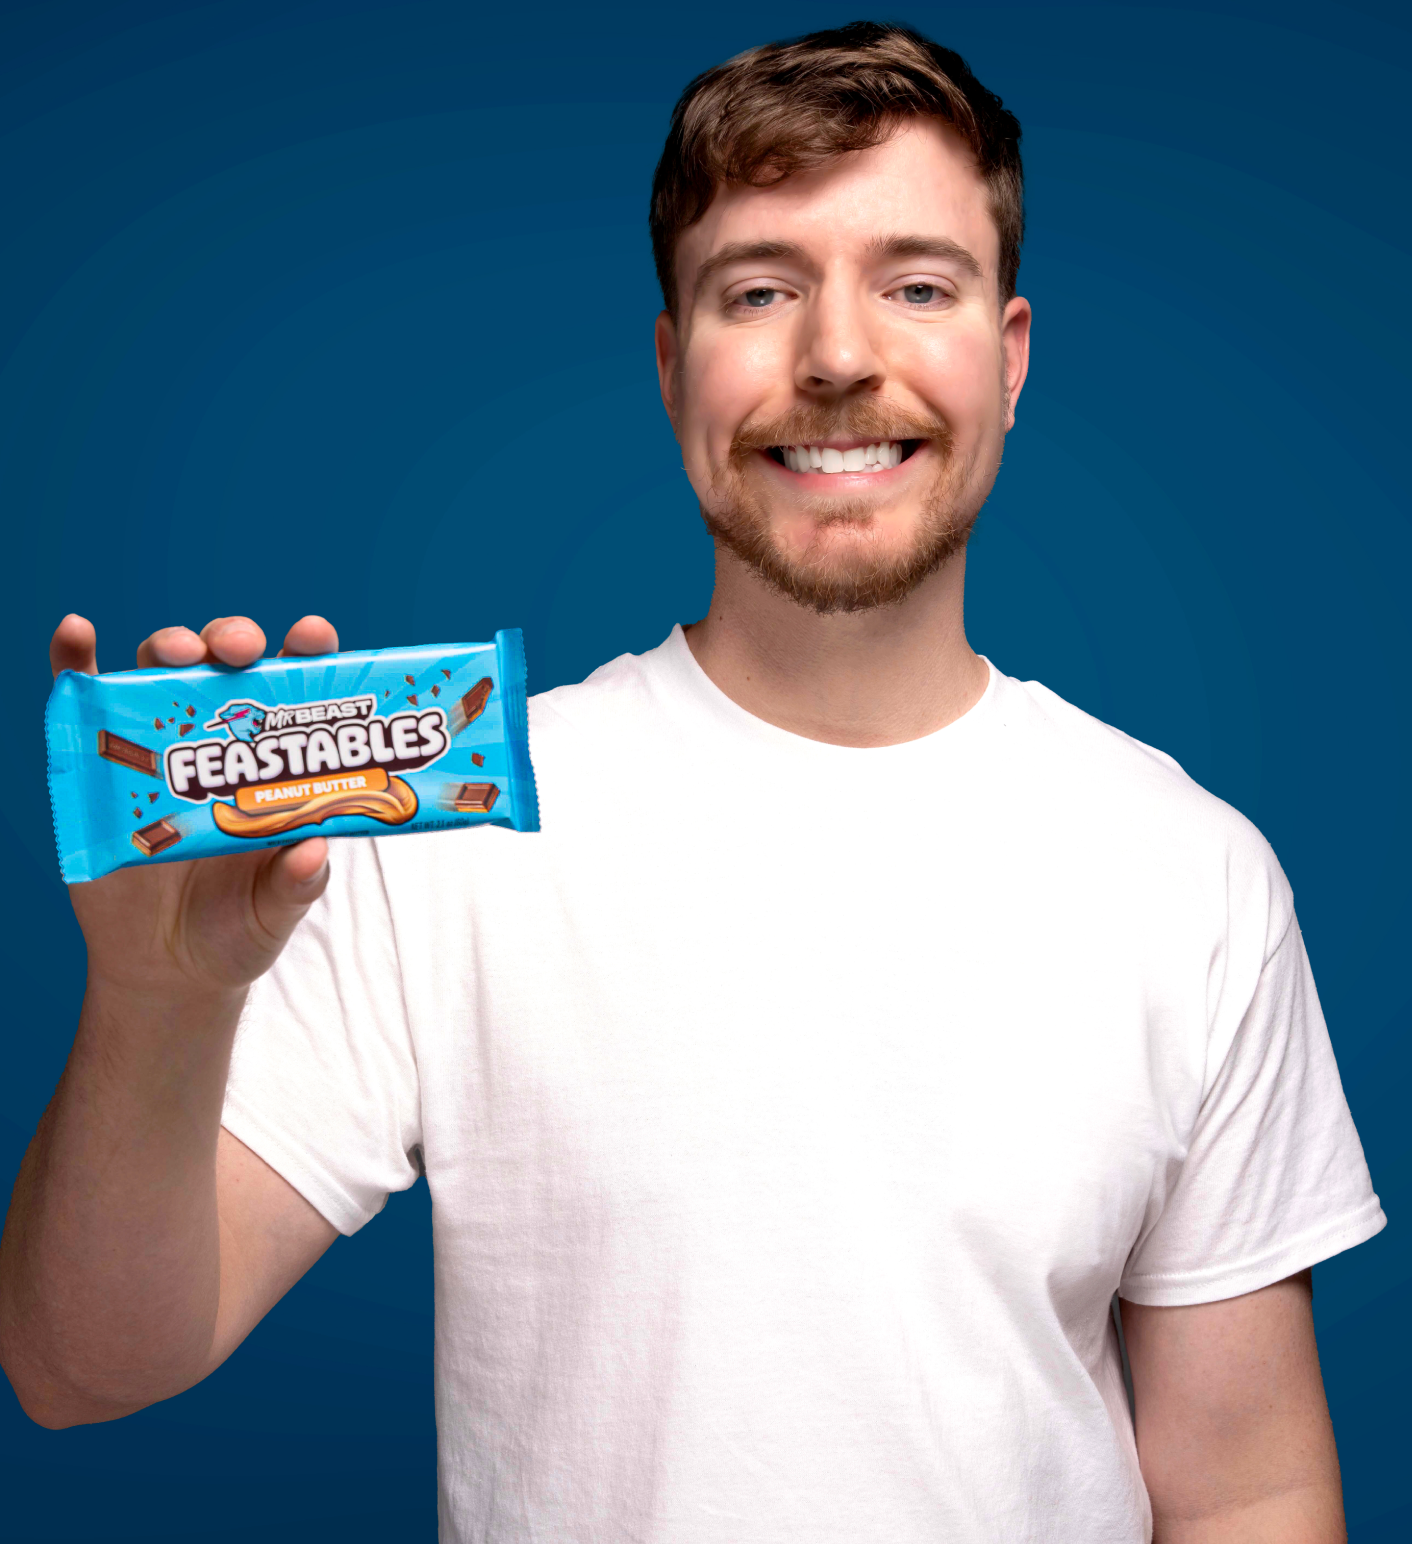 Pictured: MrBeast holding a Feastables peanut butter chocolate bar